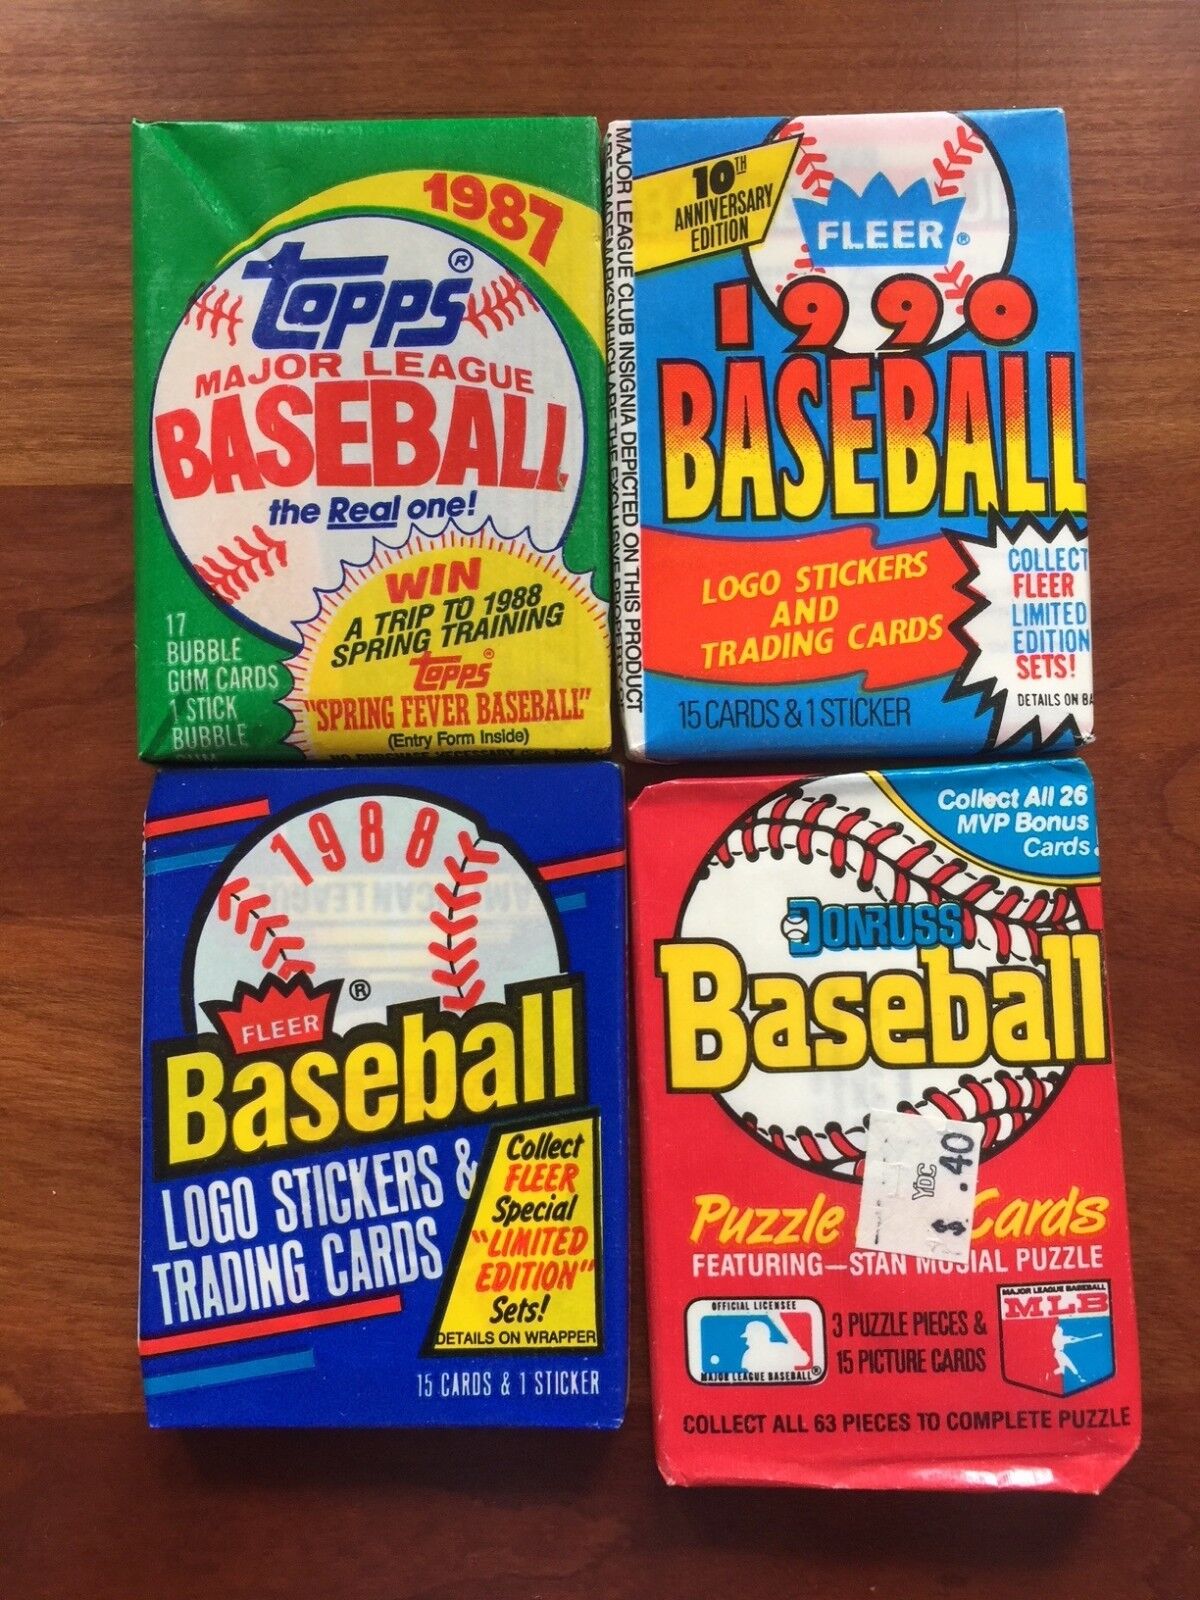 GIGANTIC SALE OF 382 OLD UNOPENED BASEBALL CARDS IN PACKS 1990 AND EARLIER